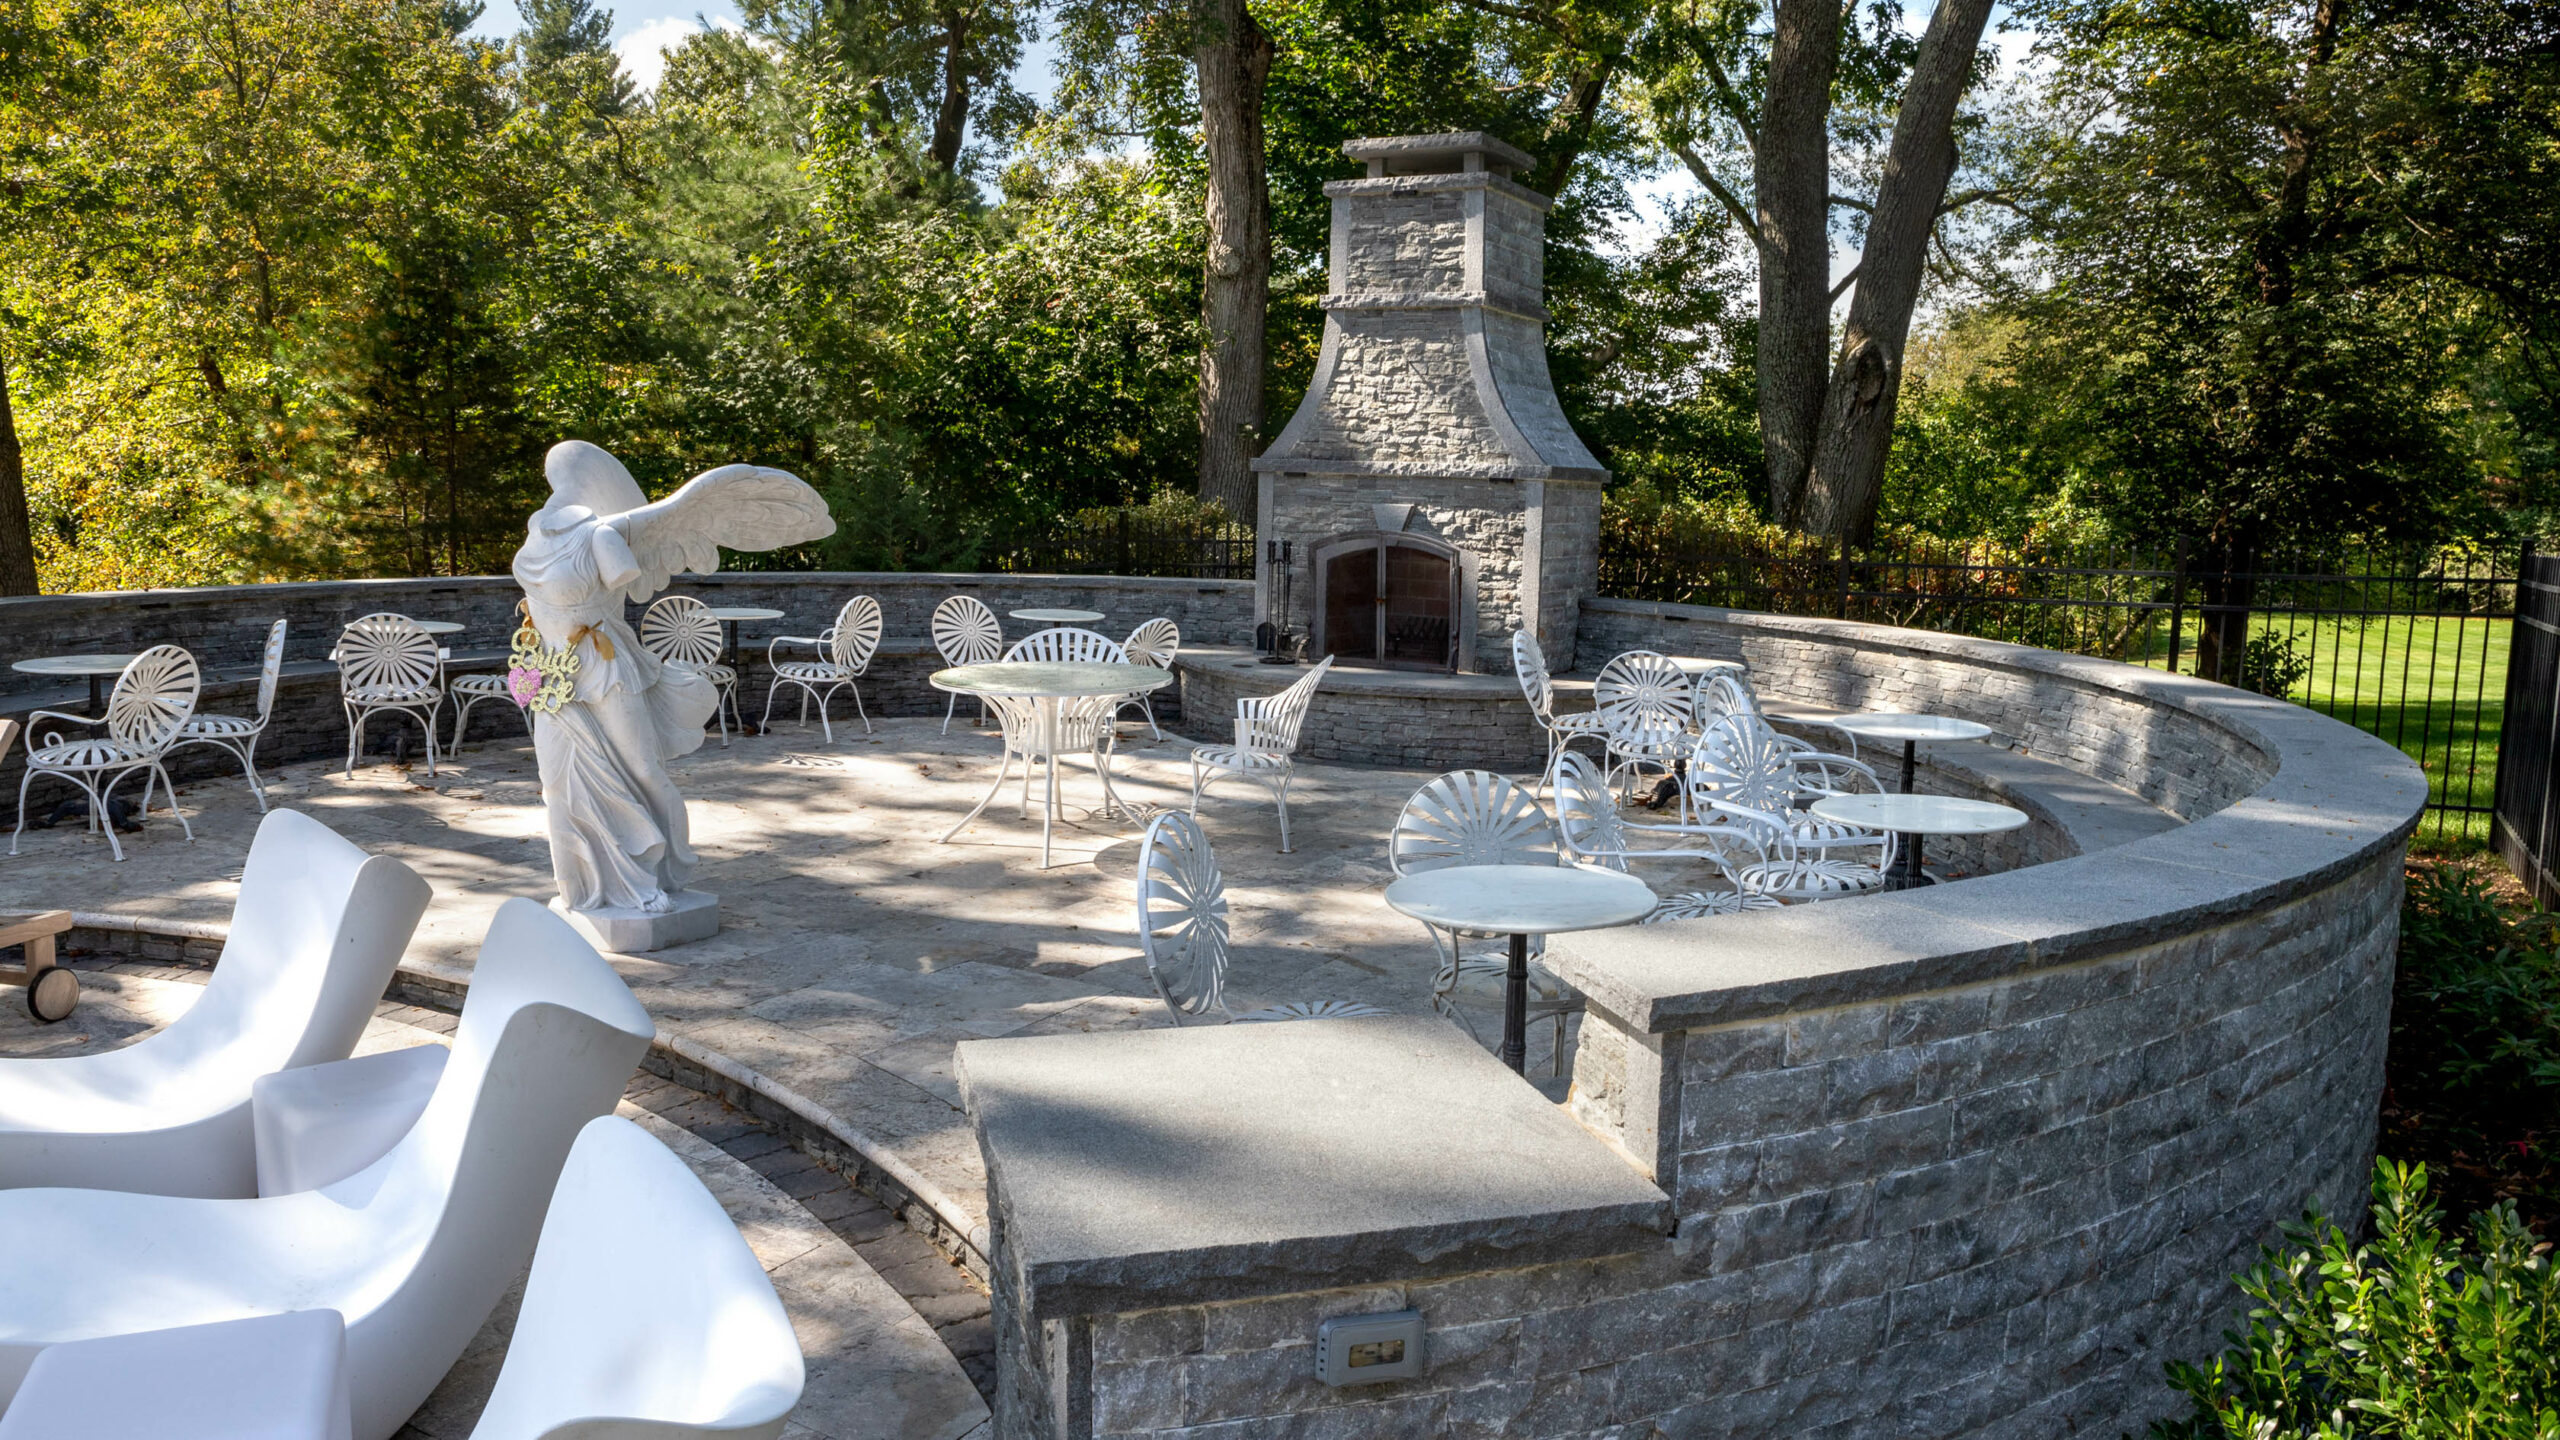 Patio area with many small tables and a marble statue and a stone fireplace.